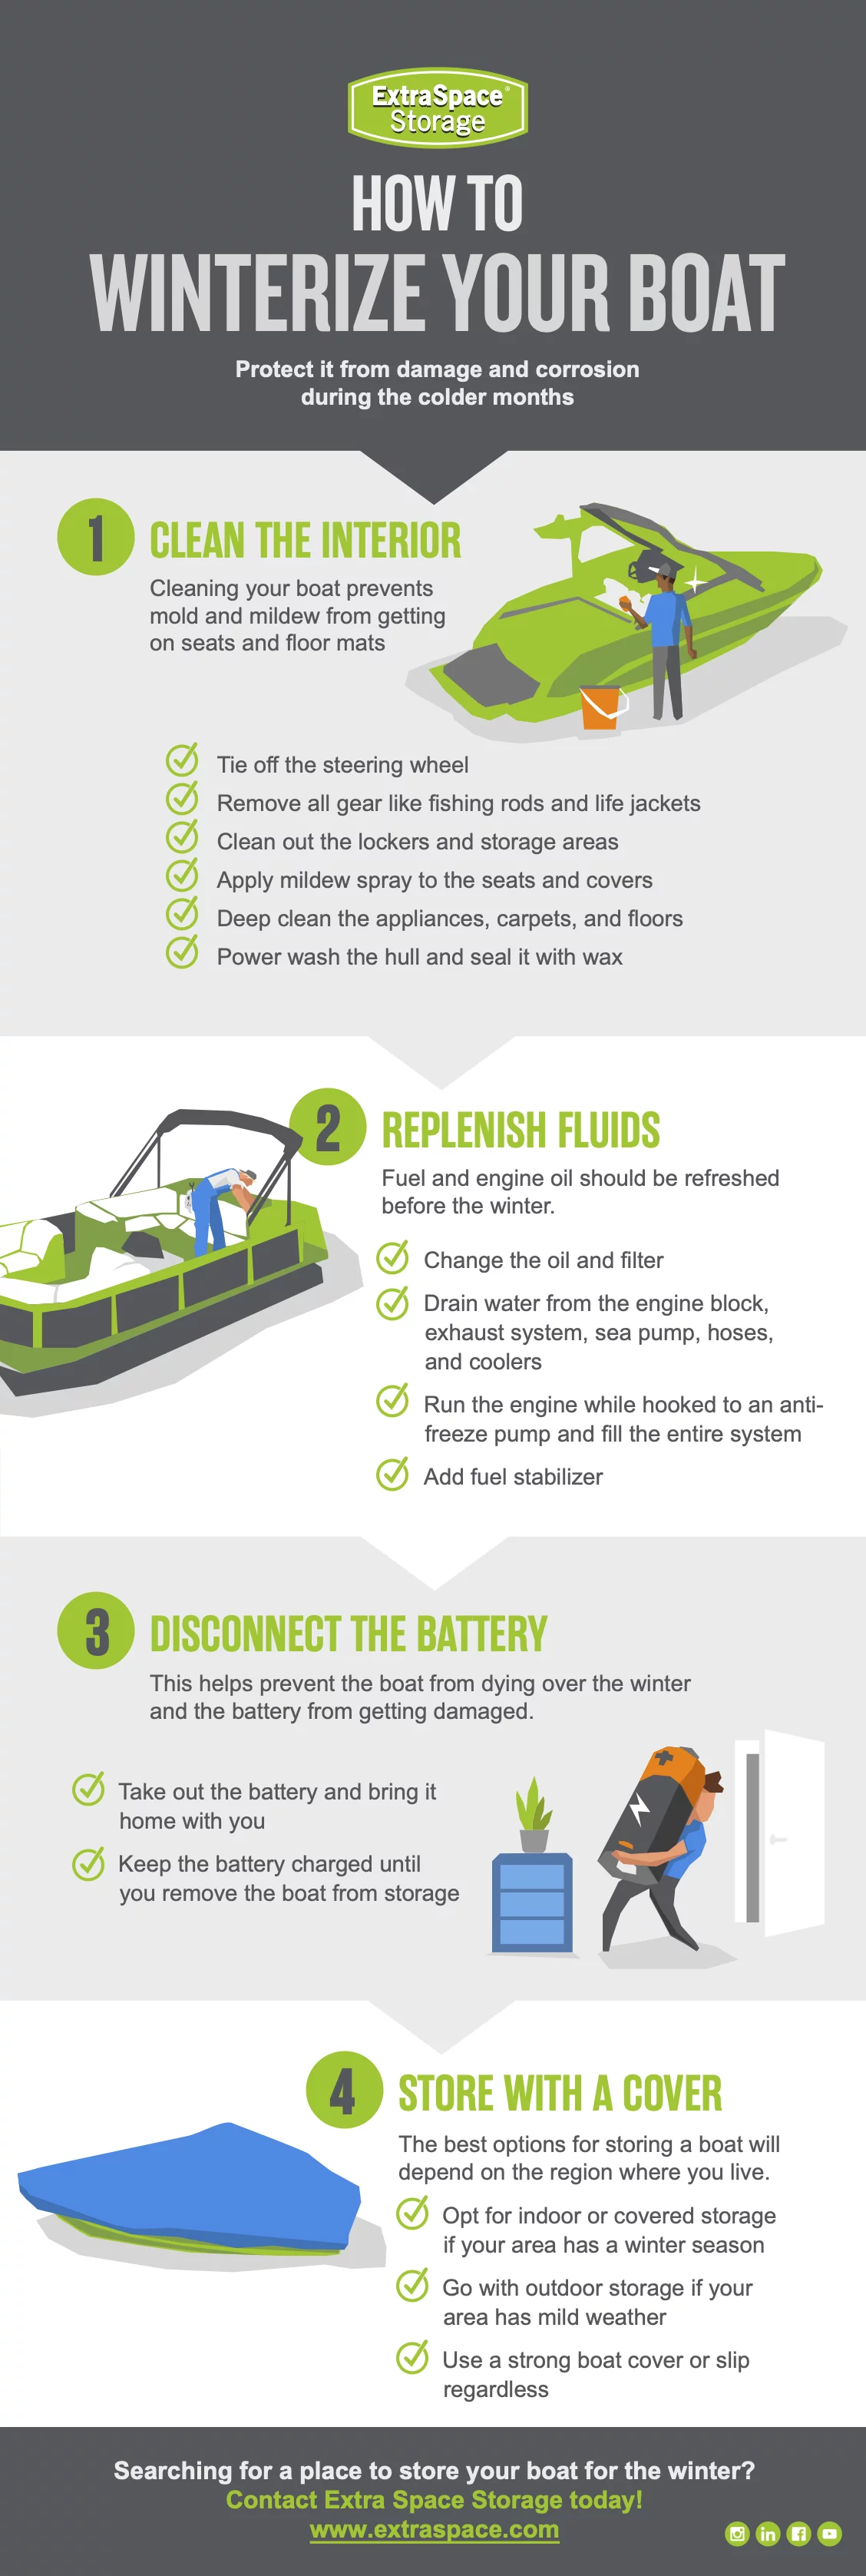 How To Winterize Your Boat